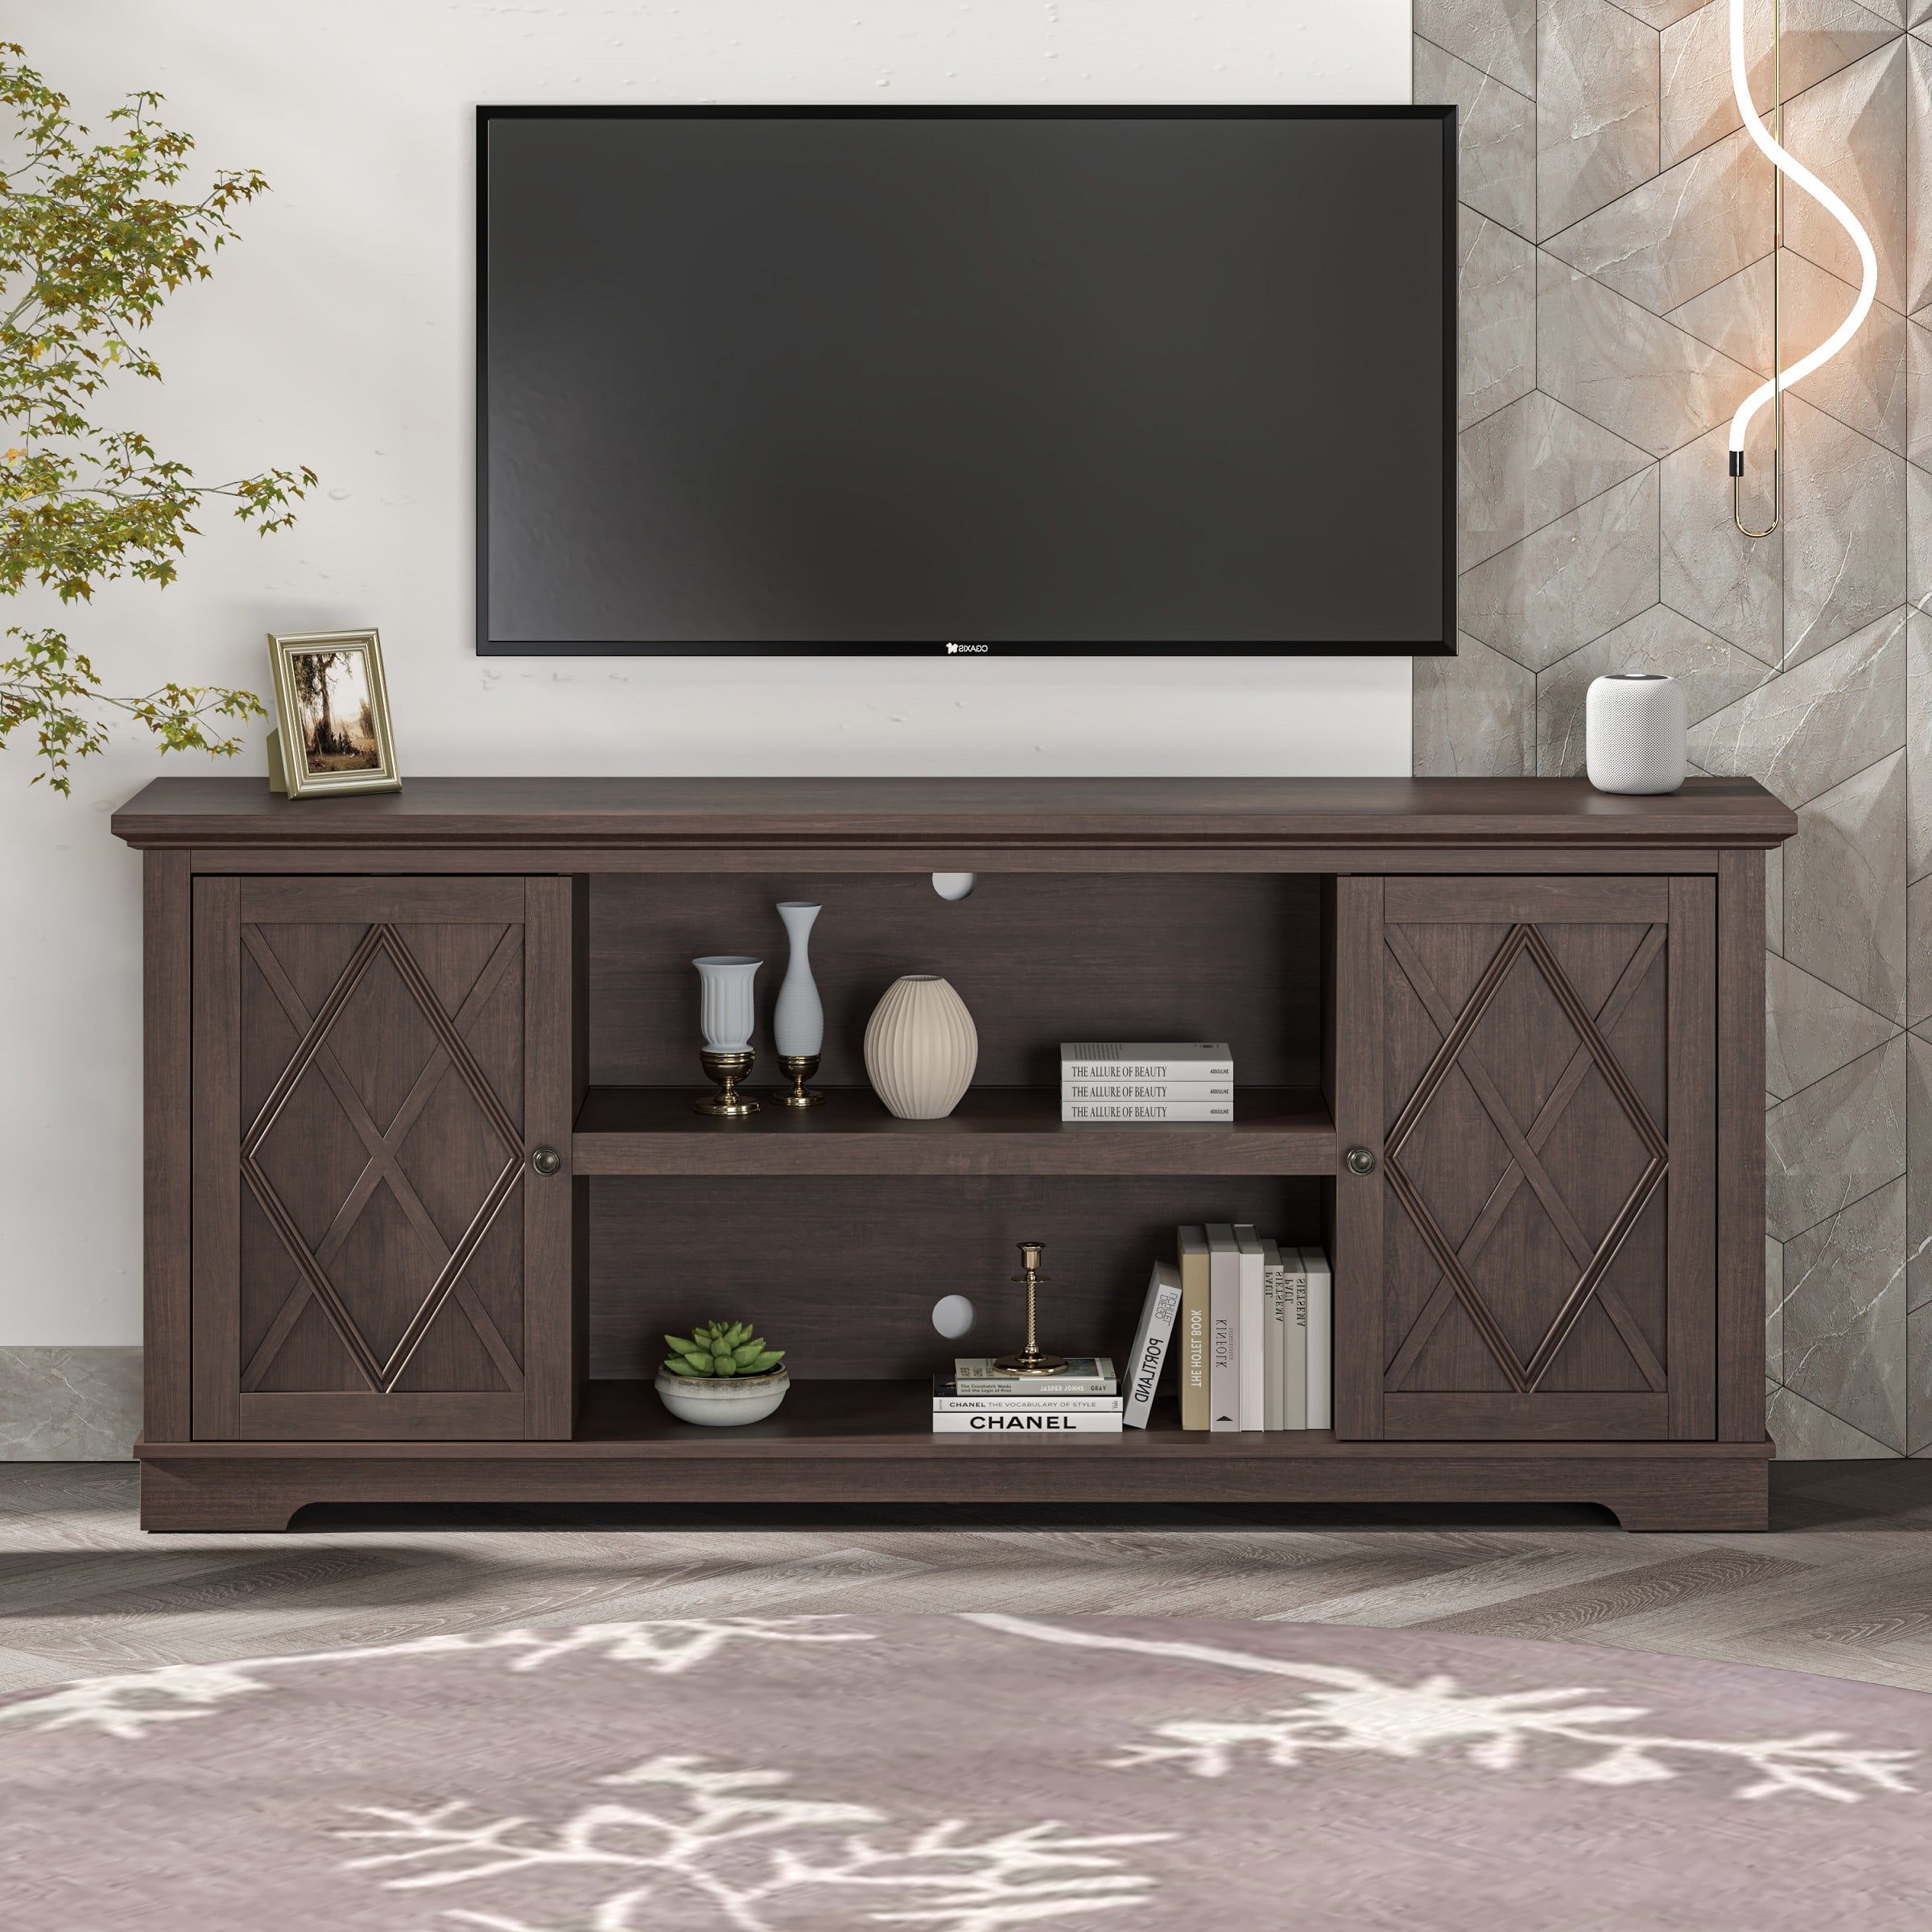 Festivo 70" Farmhouse Tv Stand Console For Tvs Up To 75 Inch – Brown – Easy  Assembly, Cable Management, Adjustable Shelves – Walmart Throughout Oaklee Tv Stands (View 10 of 20)